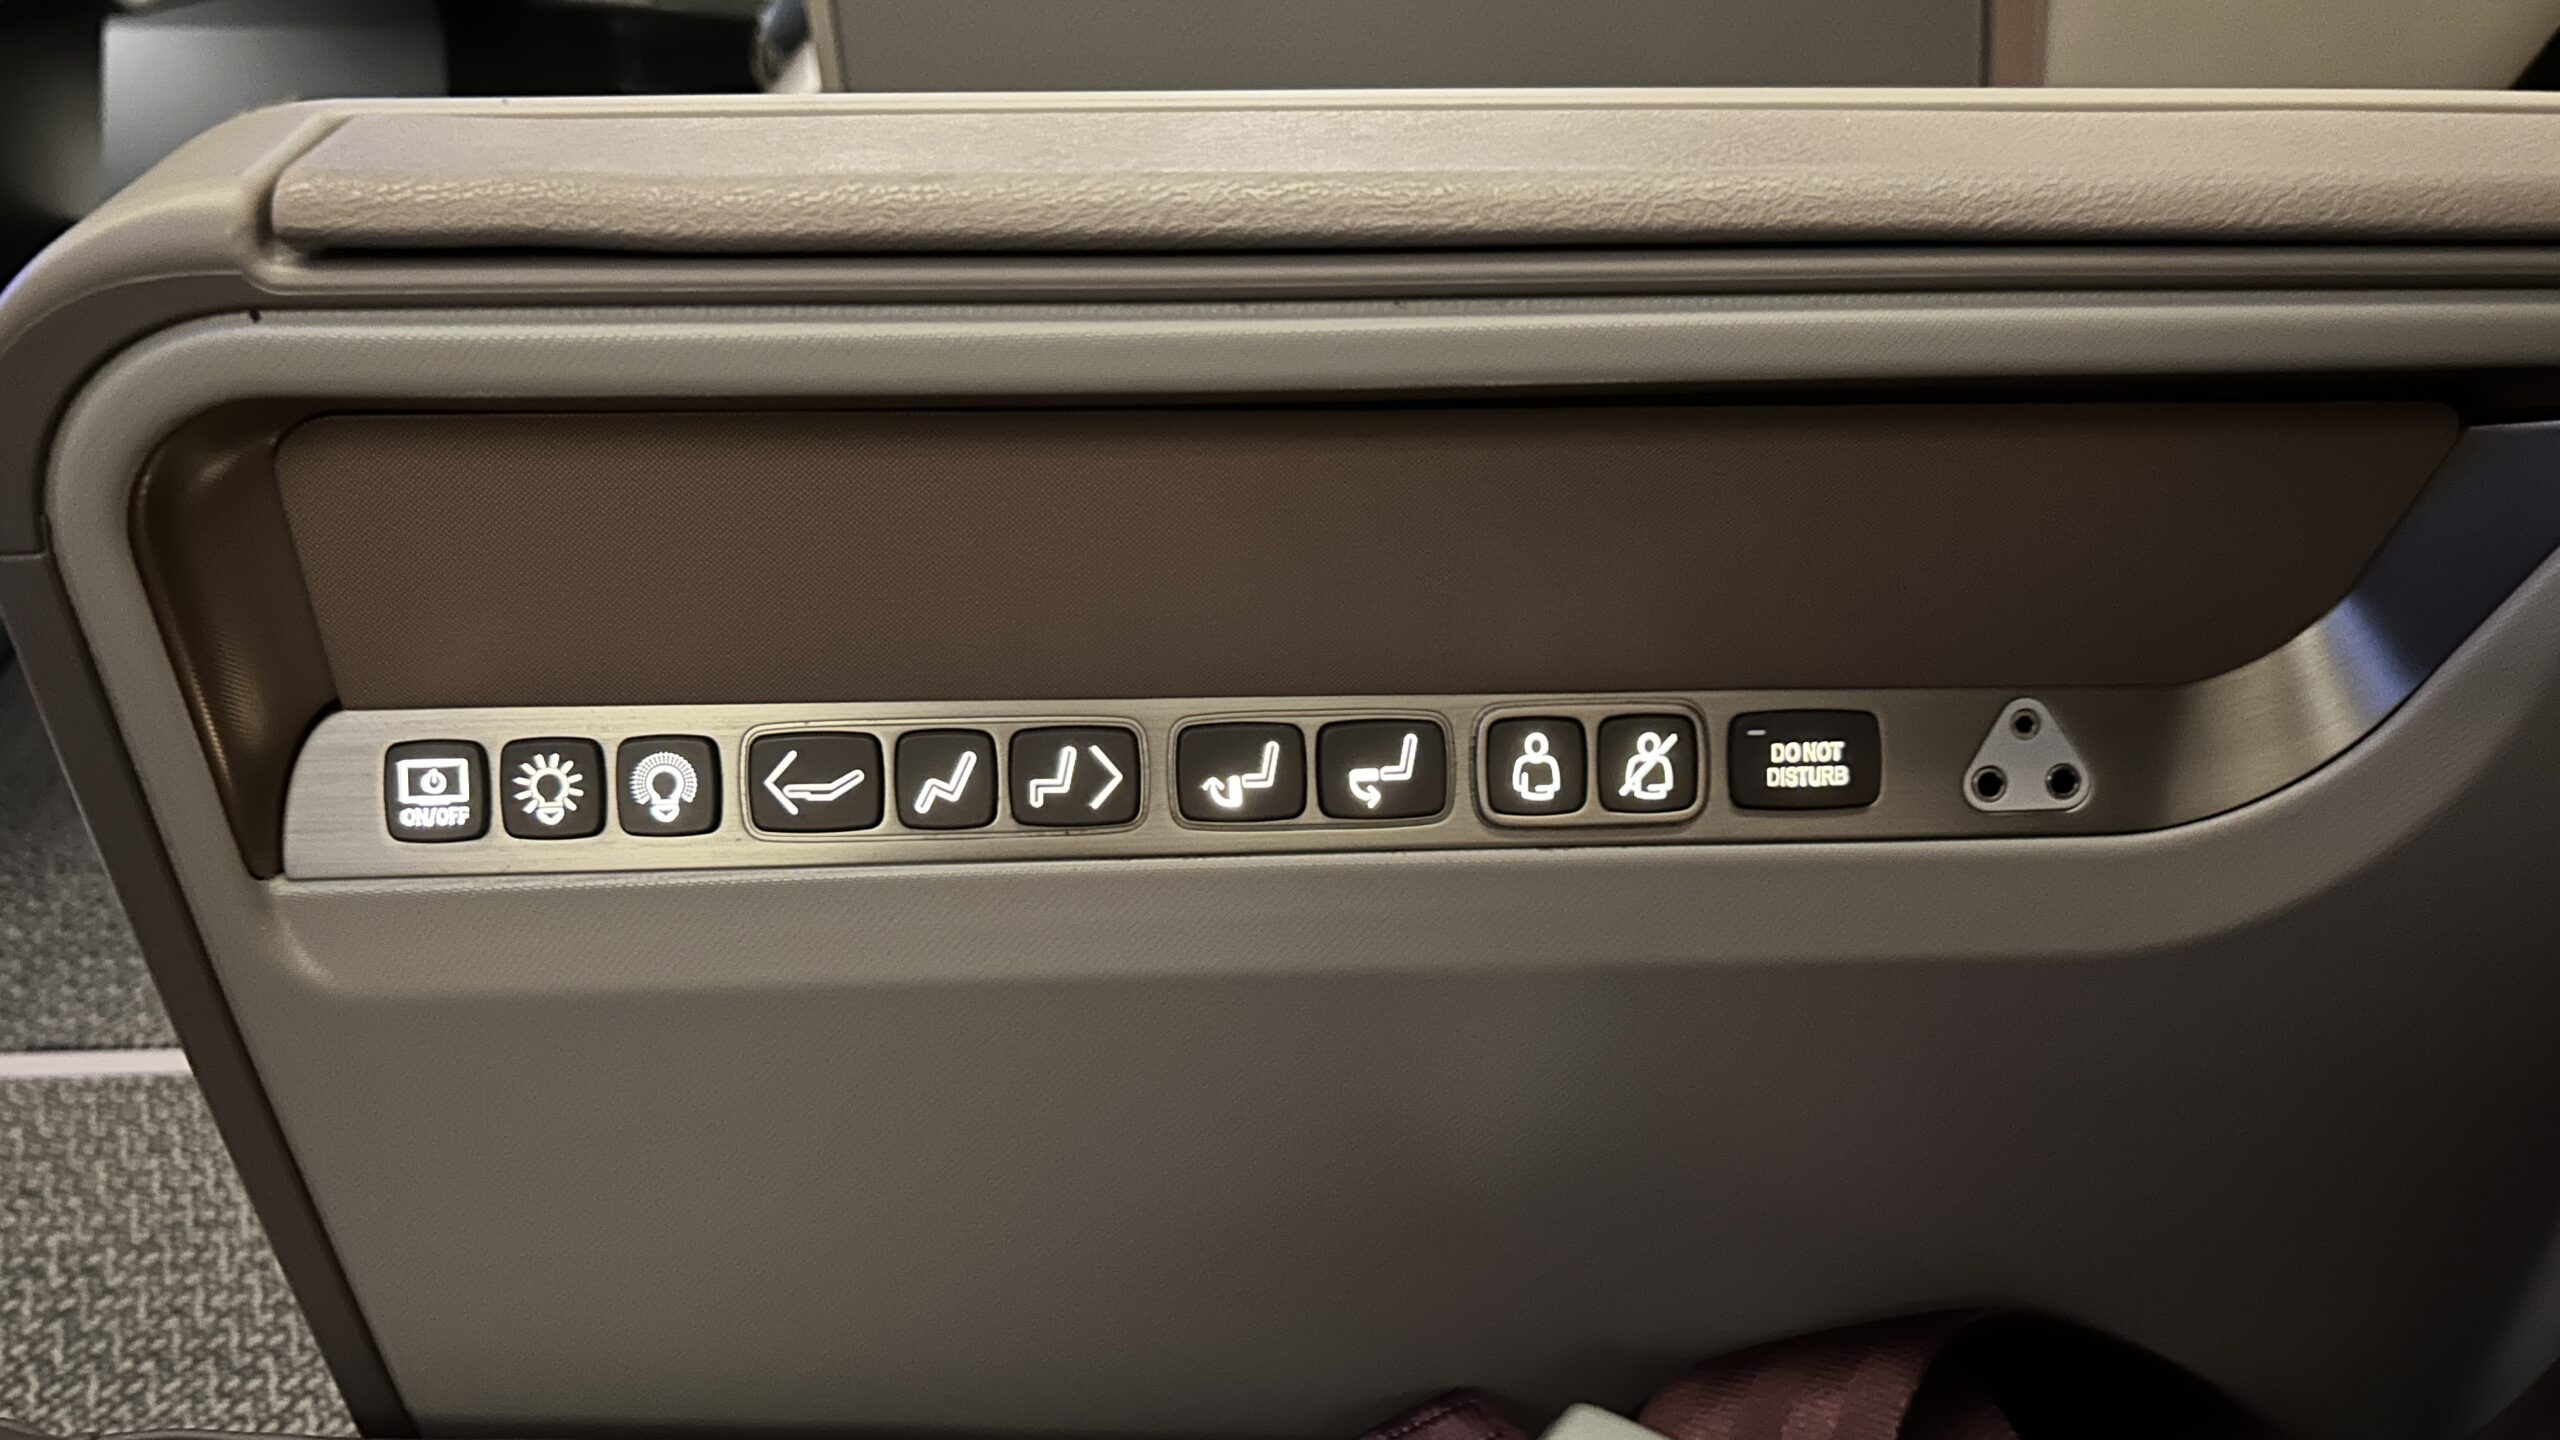 Singapore Airlines A350 Business Class Singapore to Brussels Seat Controls Button Point Hacks by Daniel Sciberras